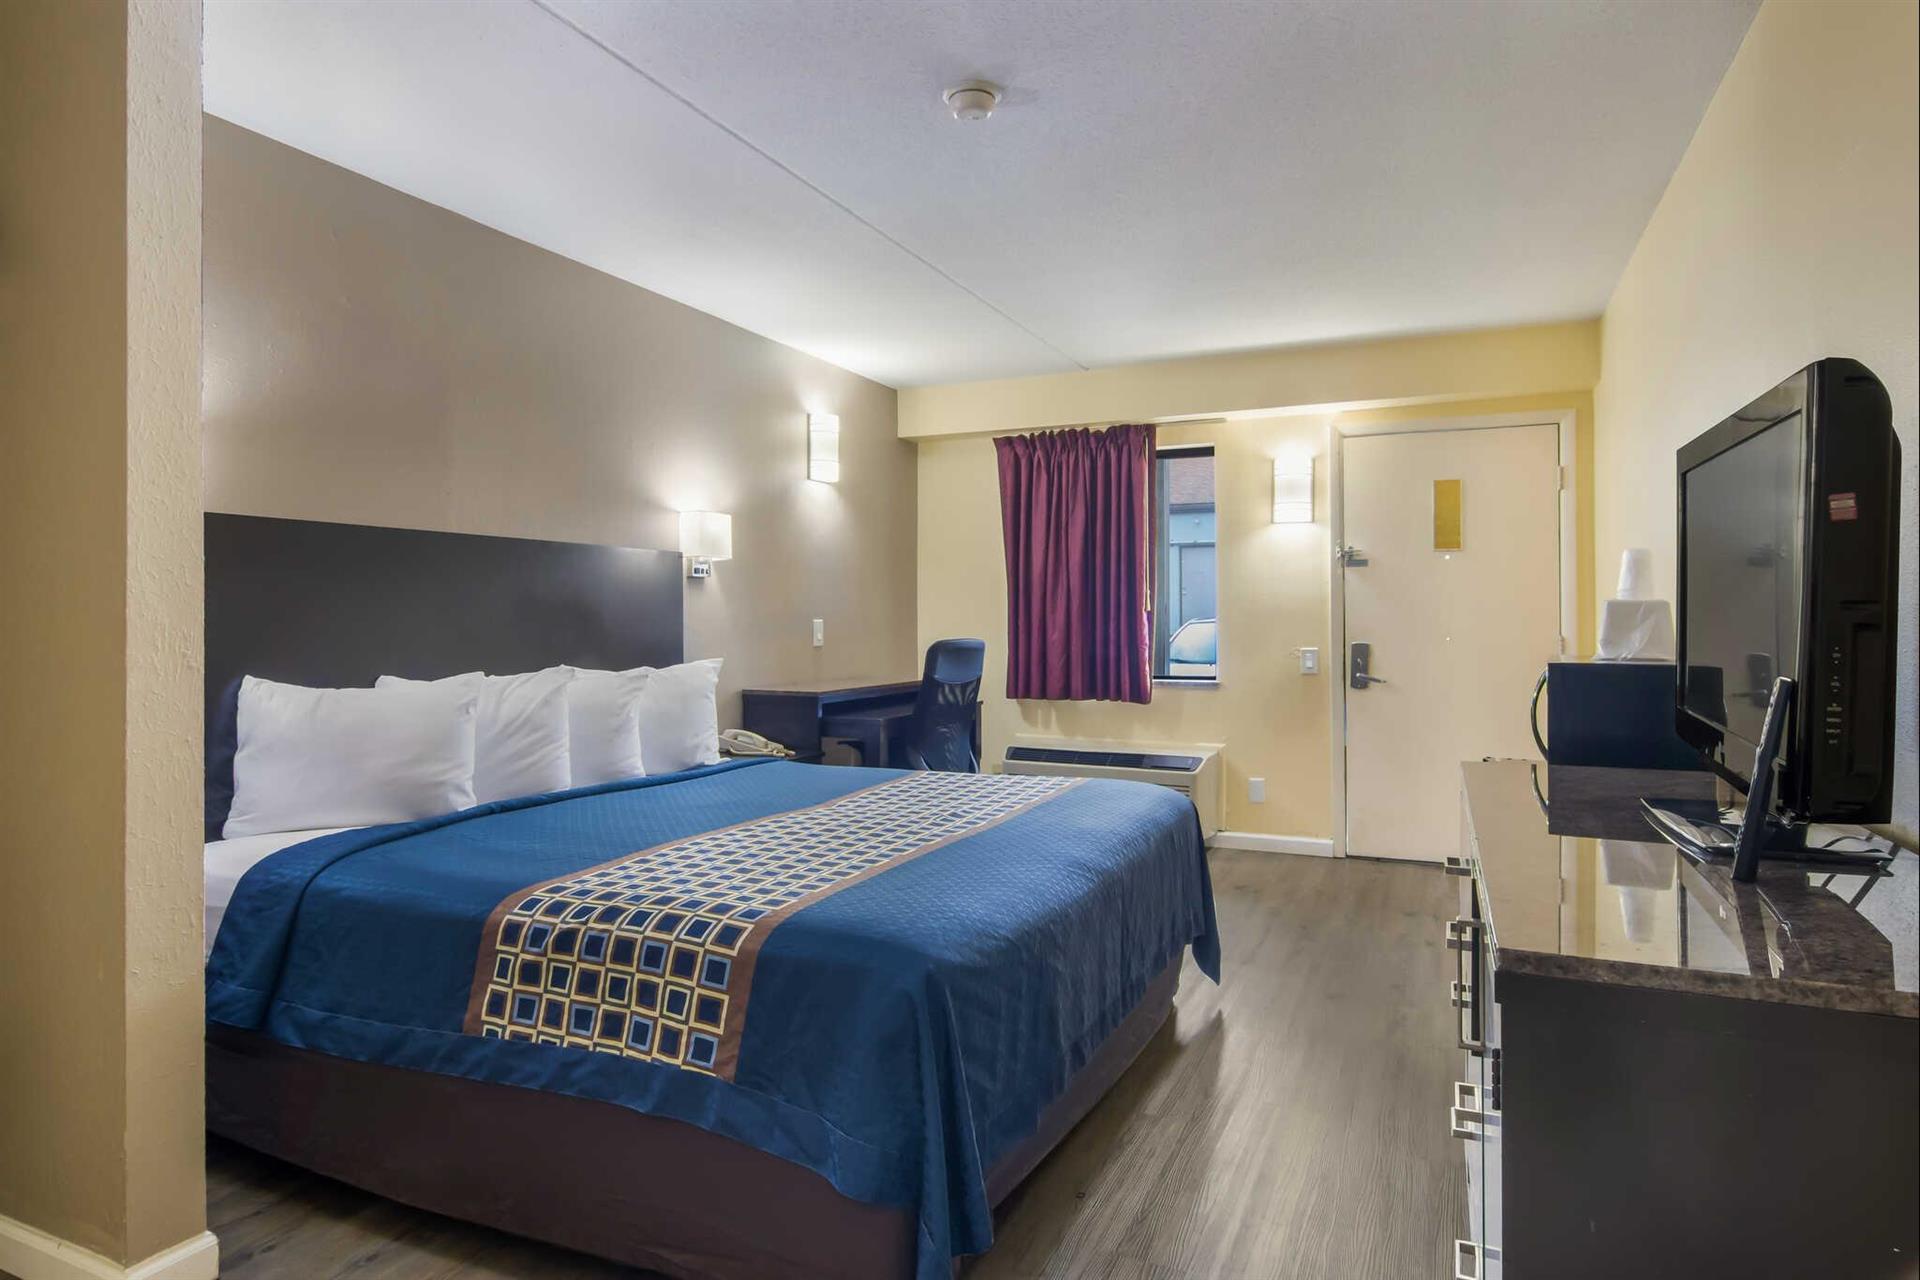 Rodeway Inn and Suites Monroeville in Monroeville, PA